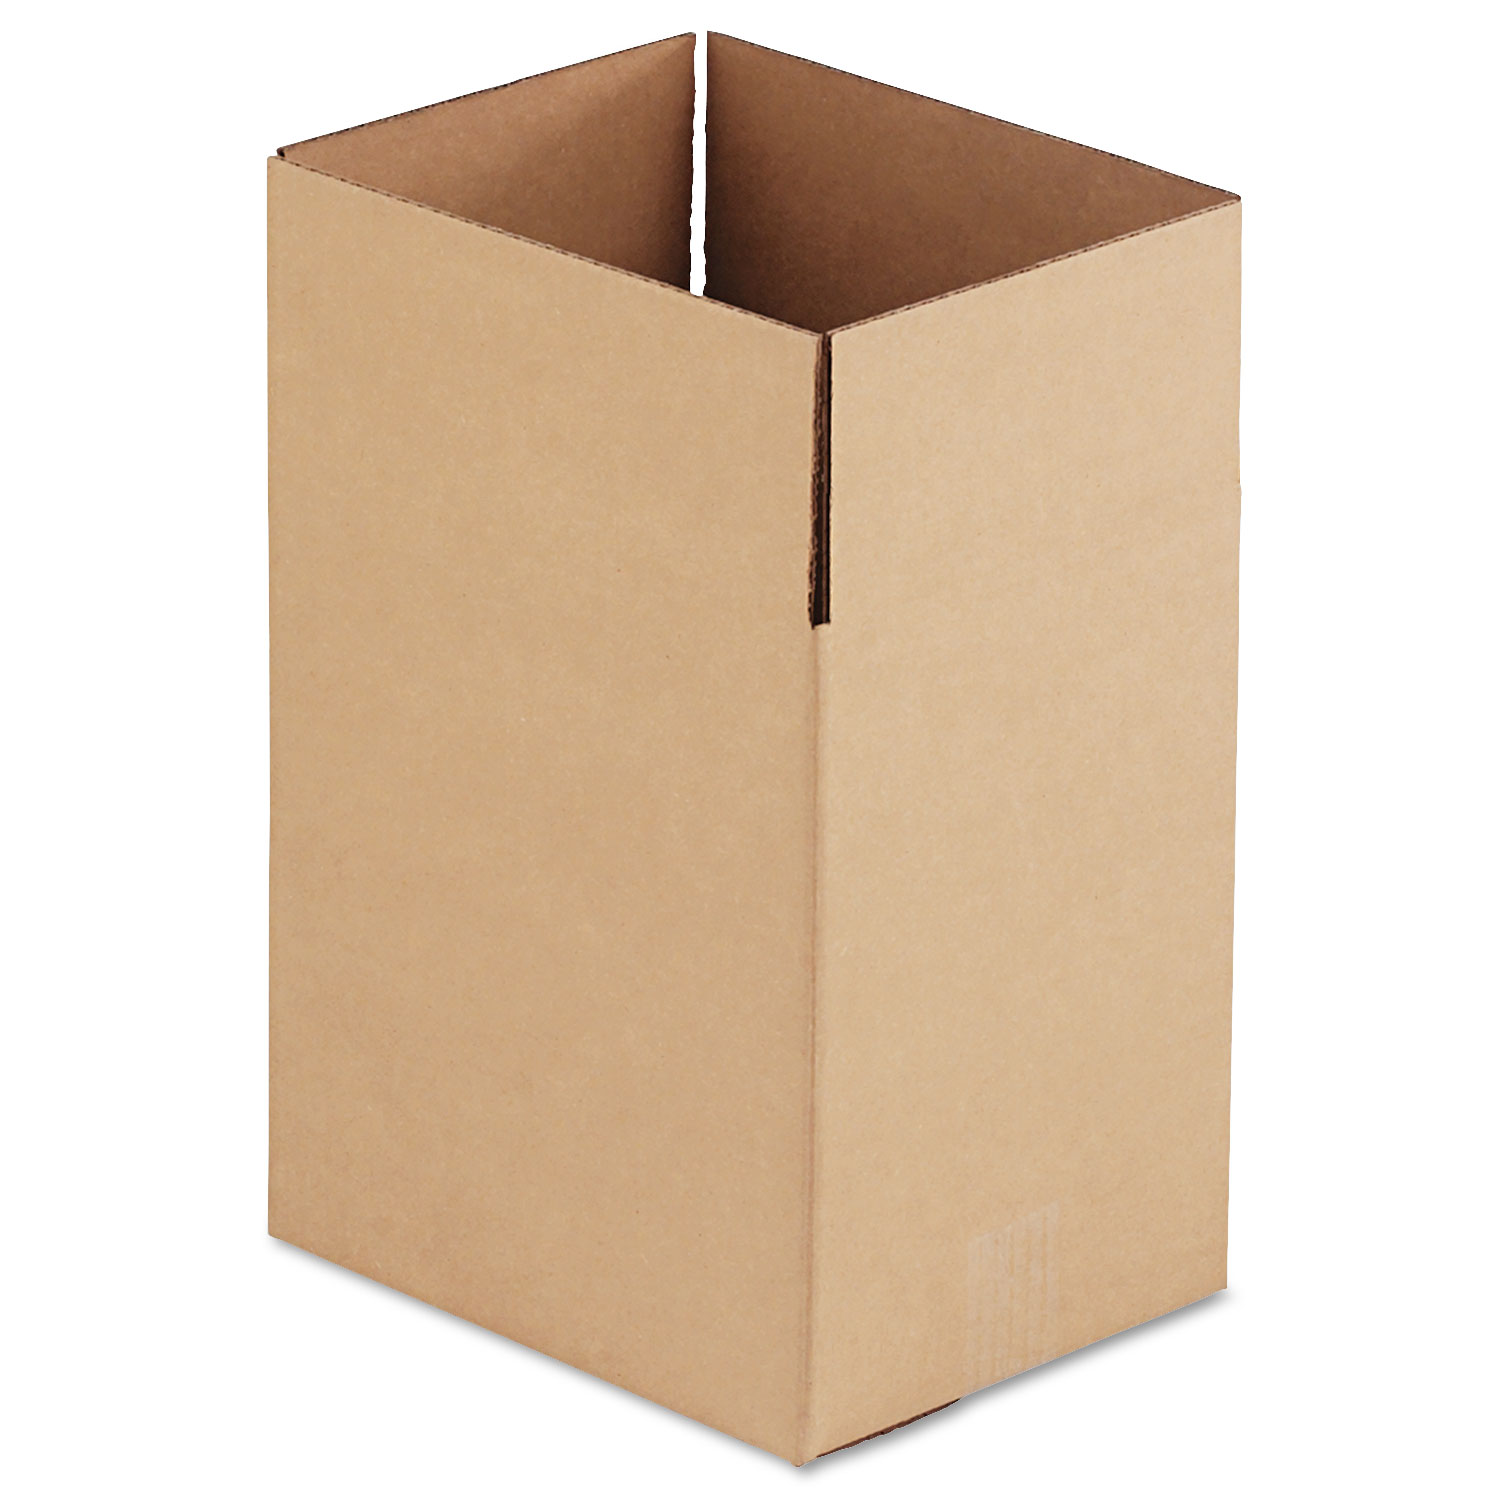 Fixed-Depth Shipping Boxes, Regular Slotted Container (RSC), 11.25" x 8.75" x 12", Brown Kraft, 25/Bundle